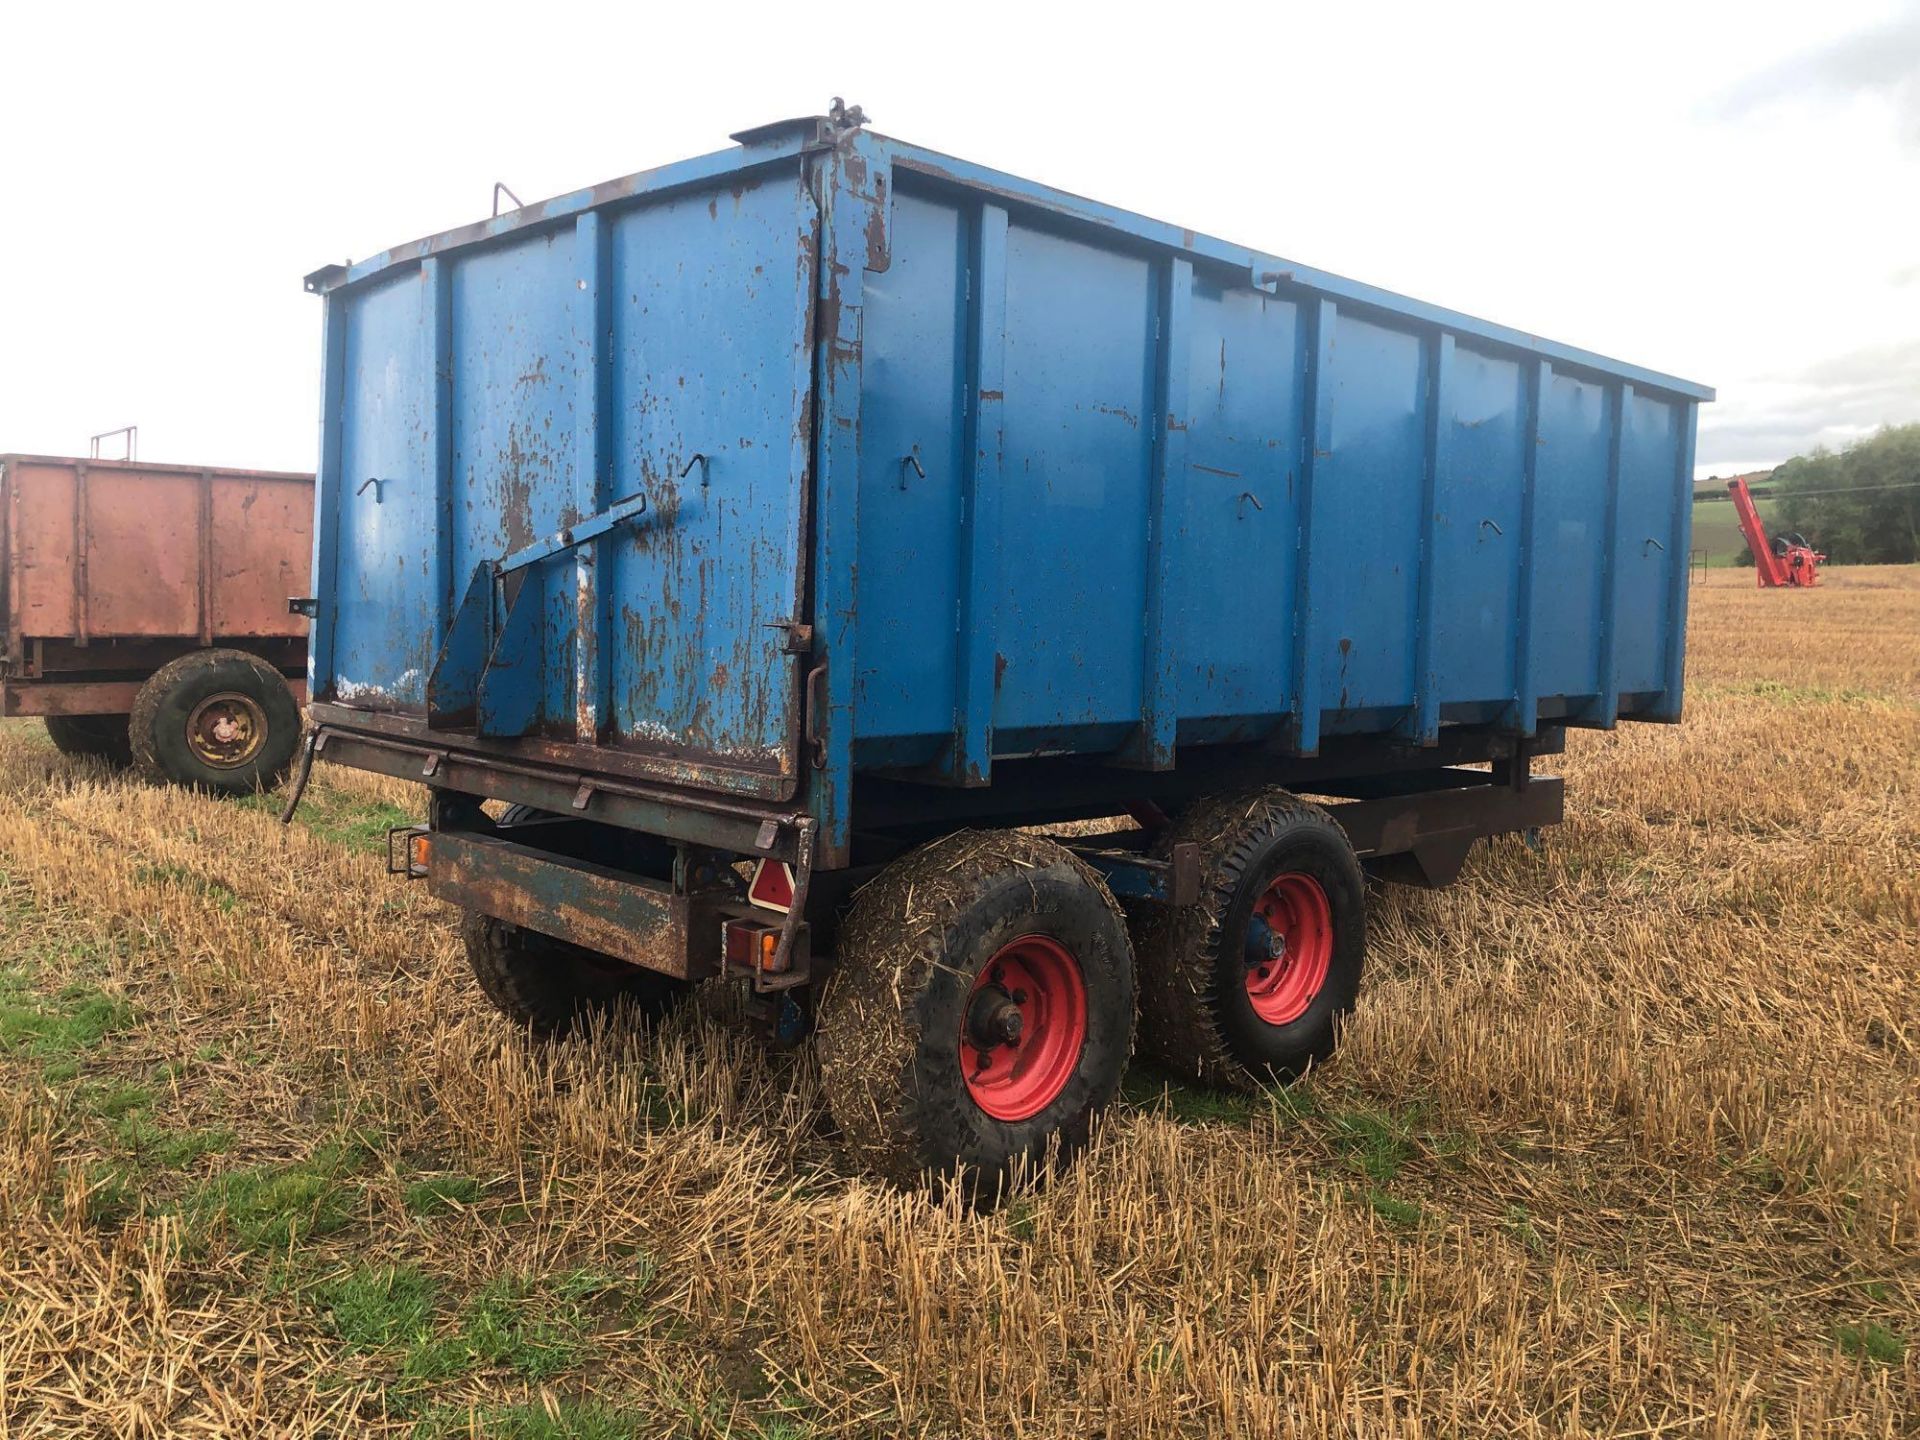 8t twin axle trailer with manual rear door and grain chute. C/w silage sides. On 12.5/80-15.3 wheels - Image 4 of 8